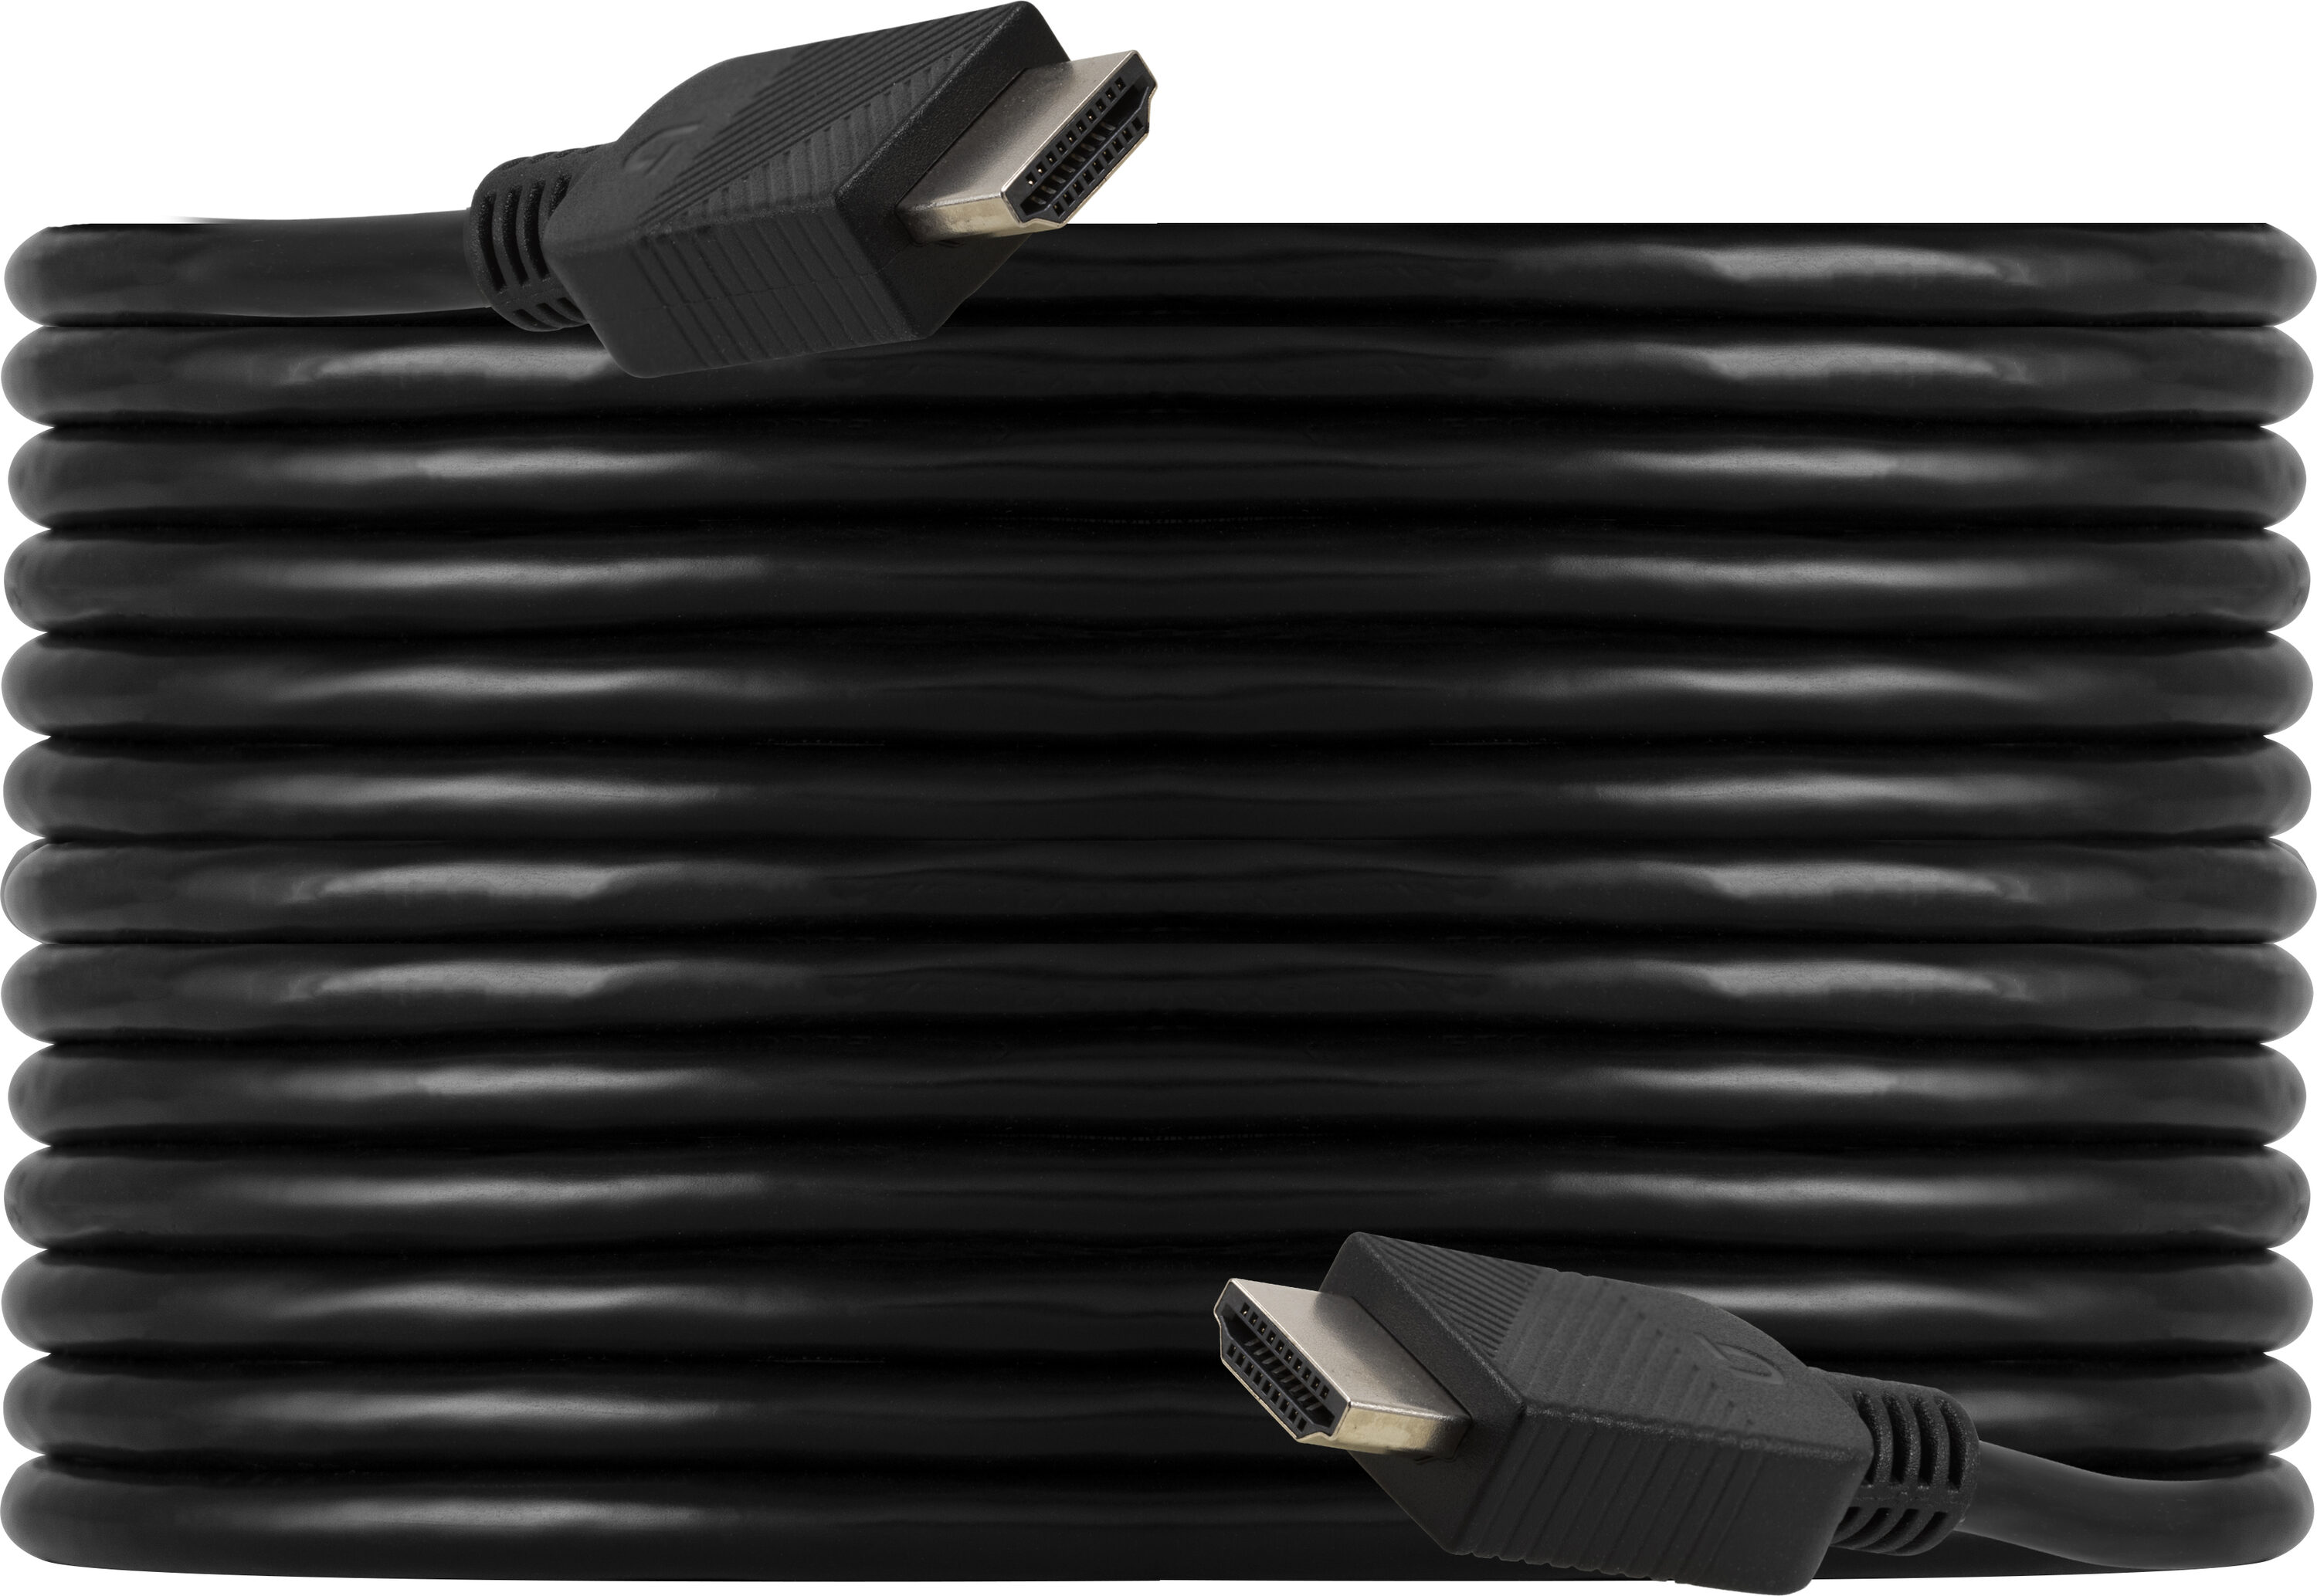 DVI HDMI Cable Cord Wire 15FT 15 feet for HDTV PC Monitor Computer Laptop  New